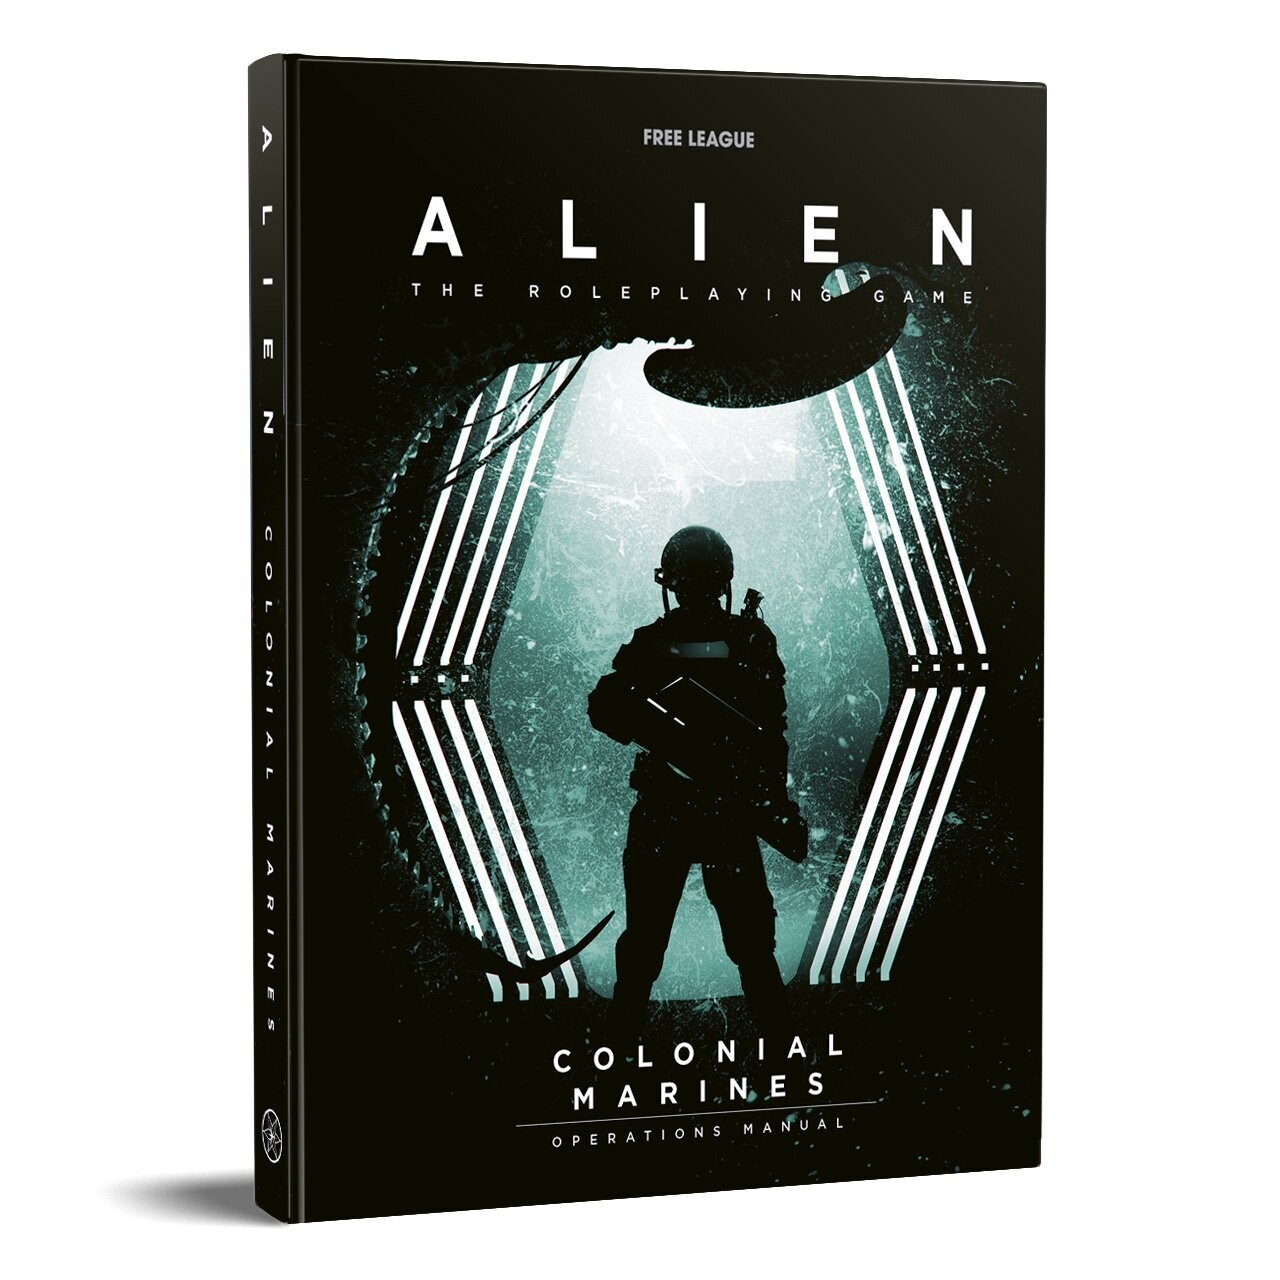 Alien: The Roleplaying Game -Colonial Marines Operations Manual (HC)